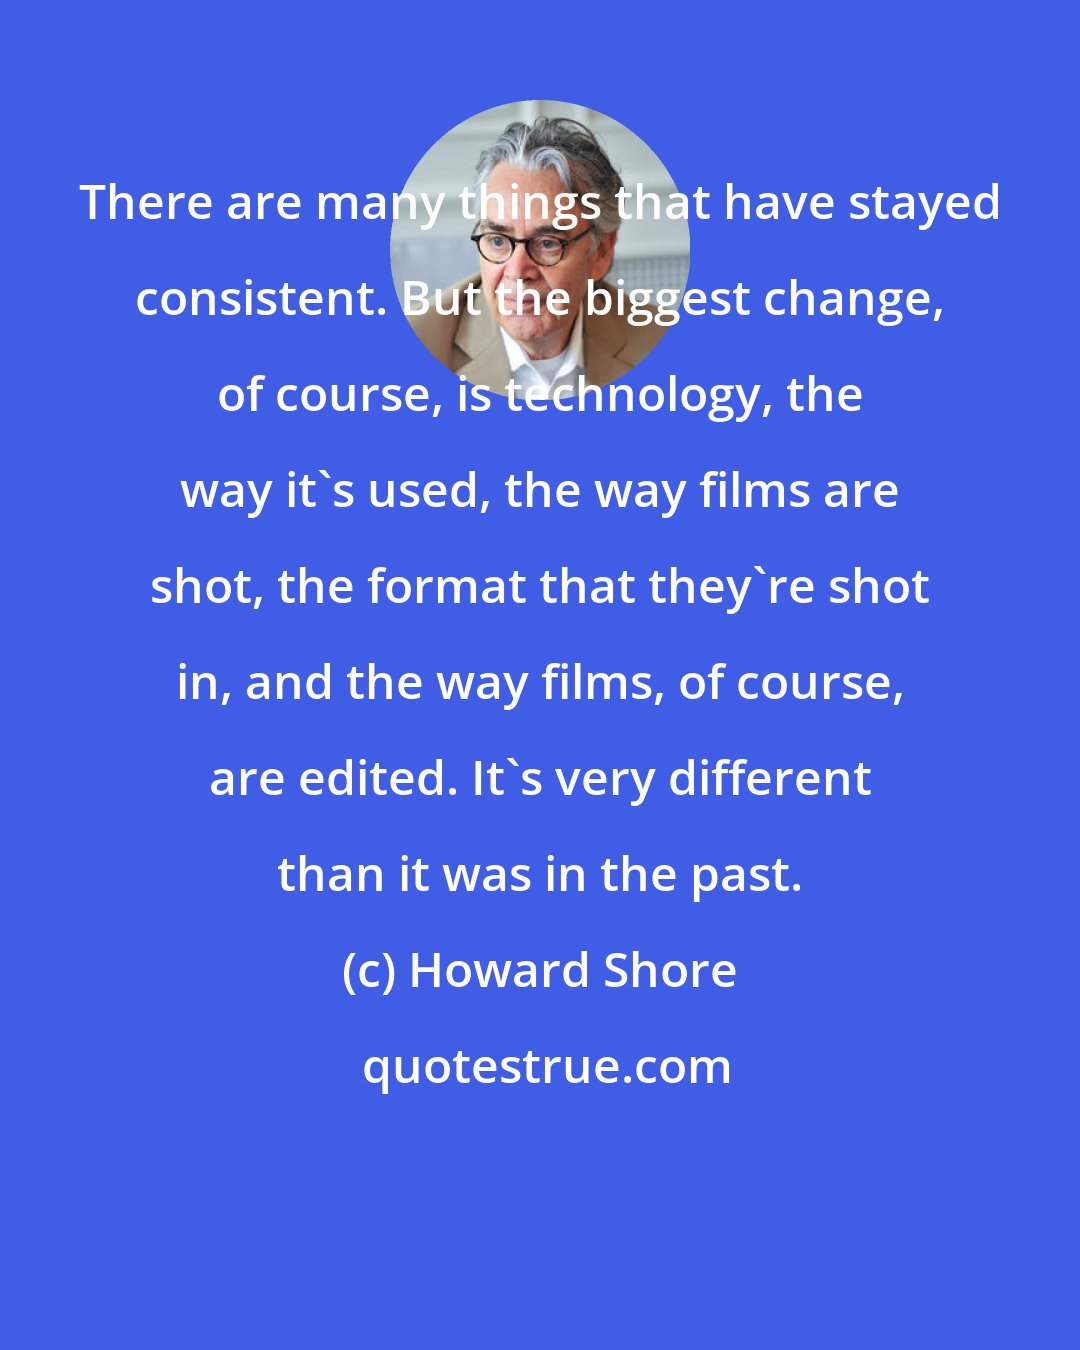 Howard Shore: There are many things that have stayed consistent. But the biggest change, of course, is technology, the way it's used, the way films are shot, the format that they're shot in, and the way films, of course, are edited. It's very different than it was in the past.